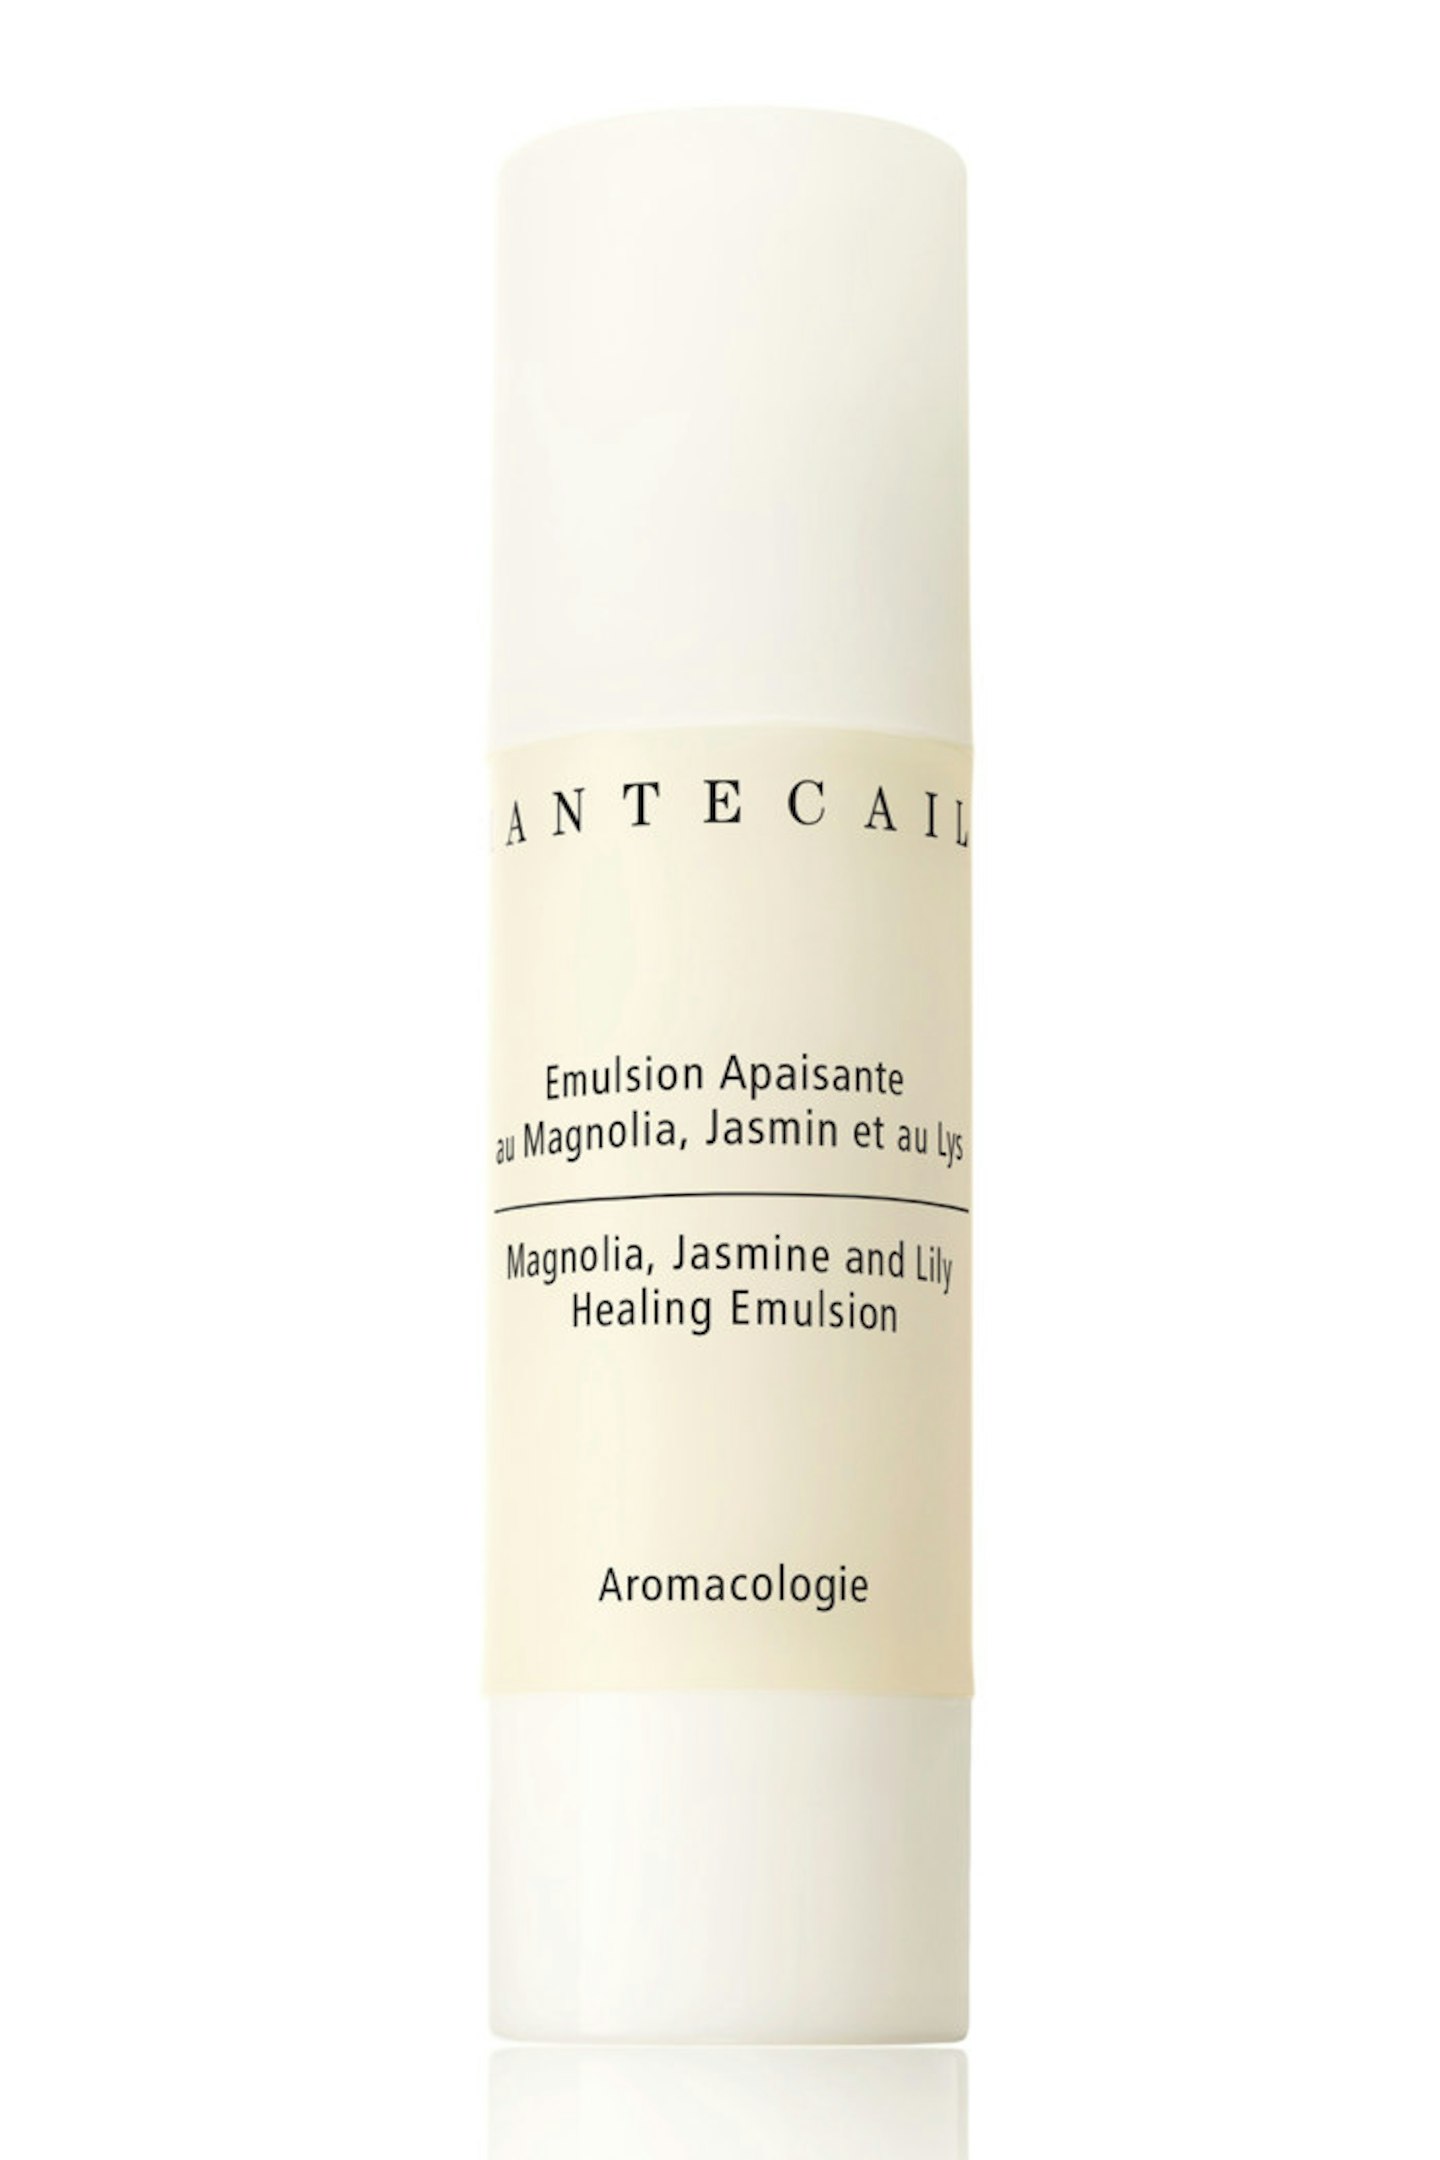 Chantecaille Magnolia, Jasmine and Lily Healing Emulsion, £105.00, Space NK